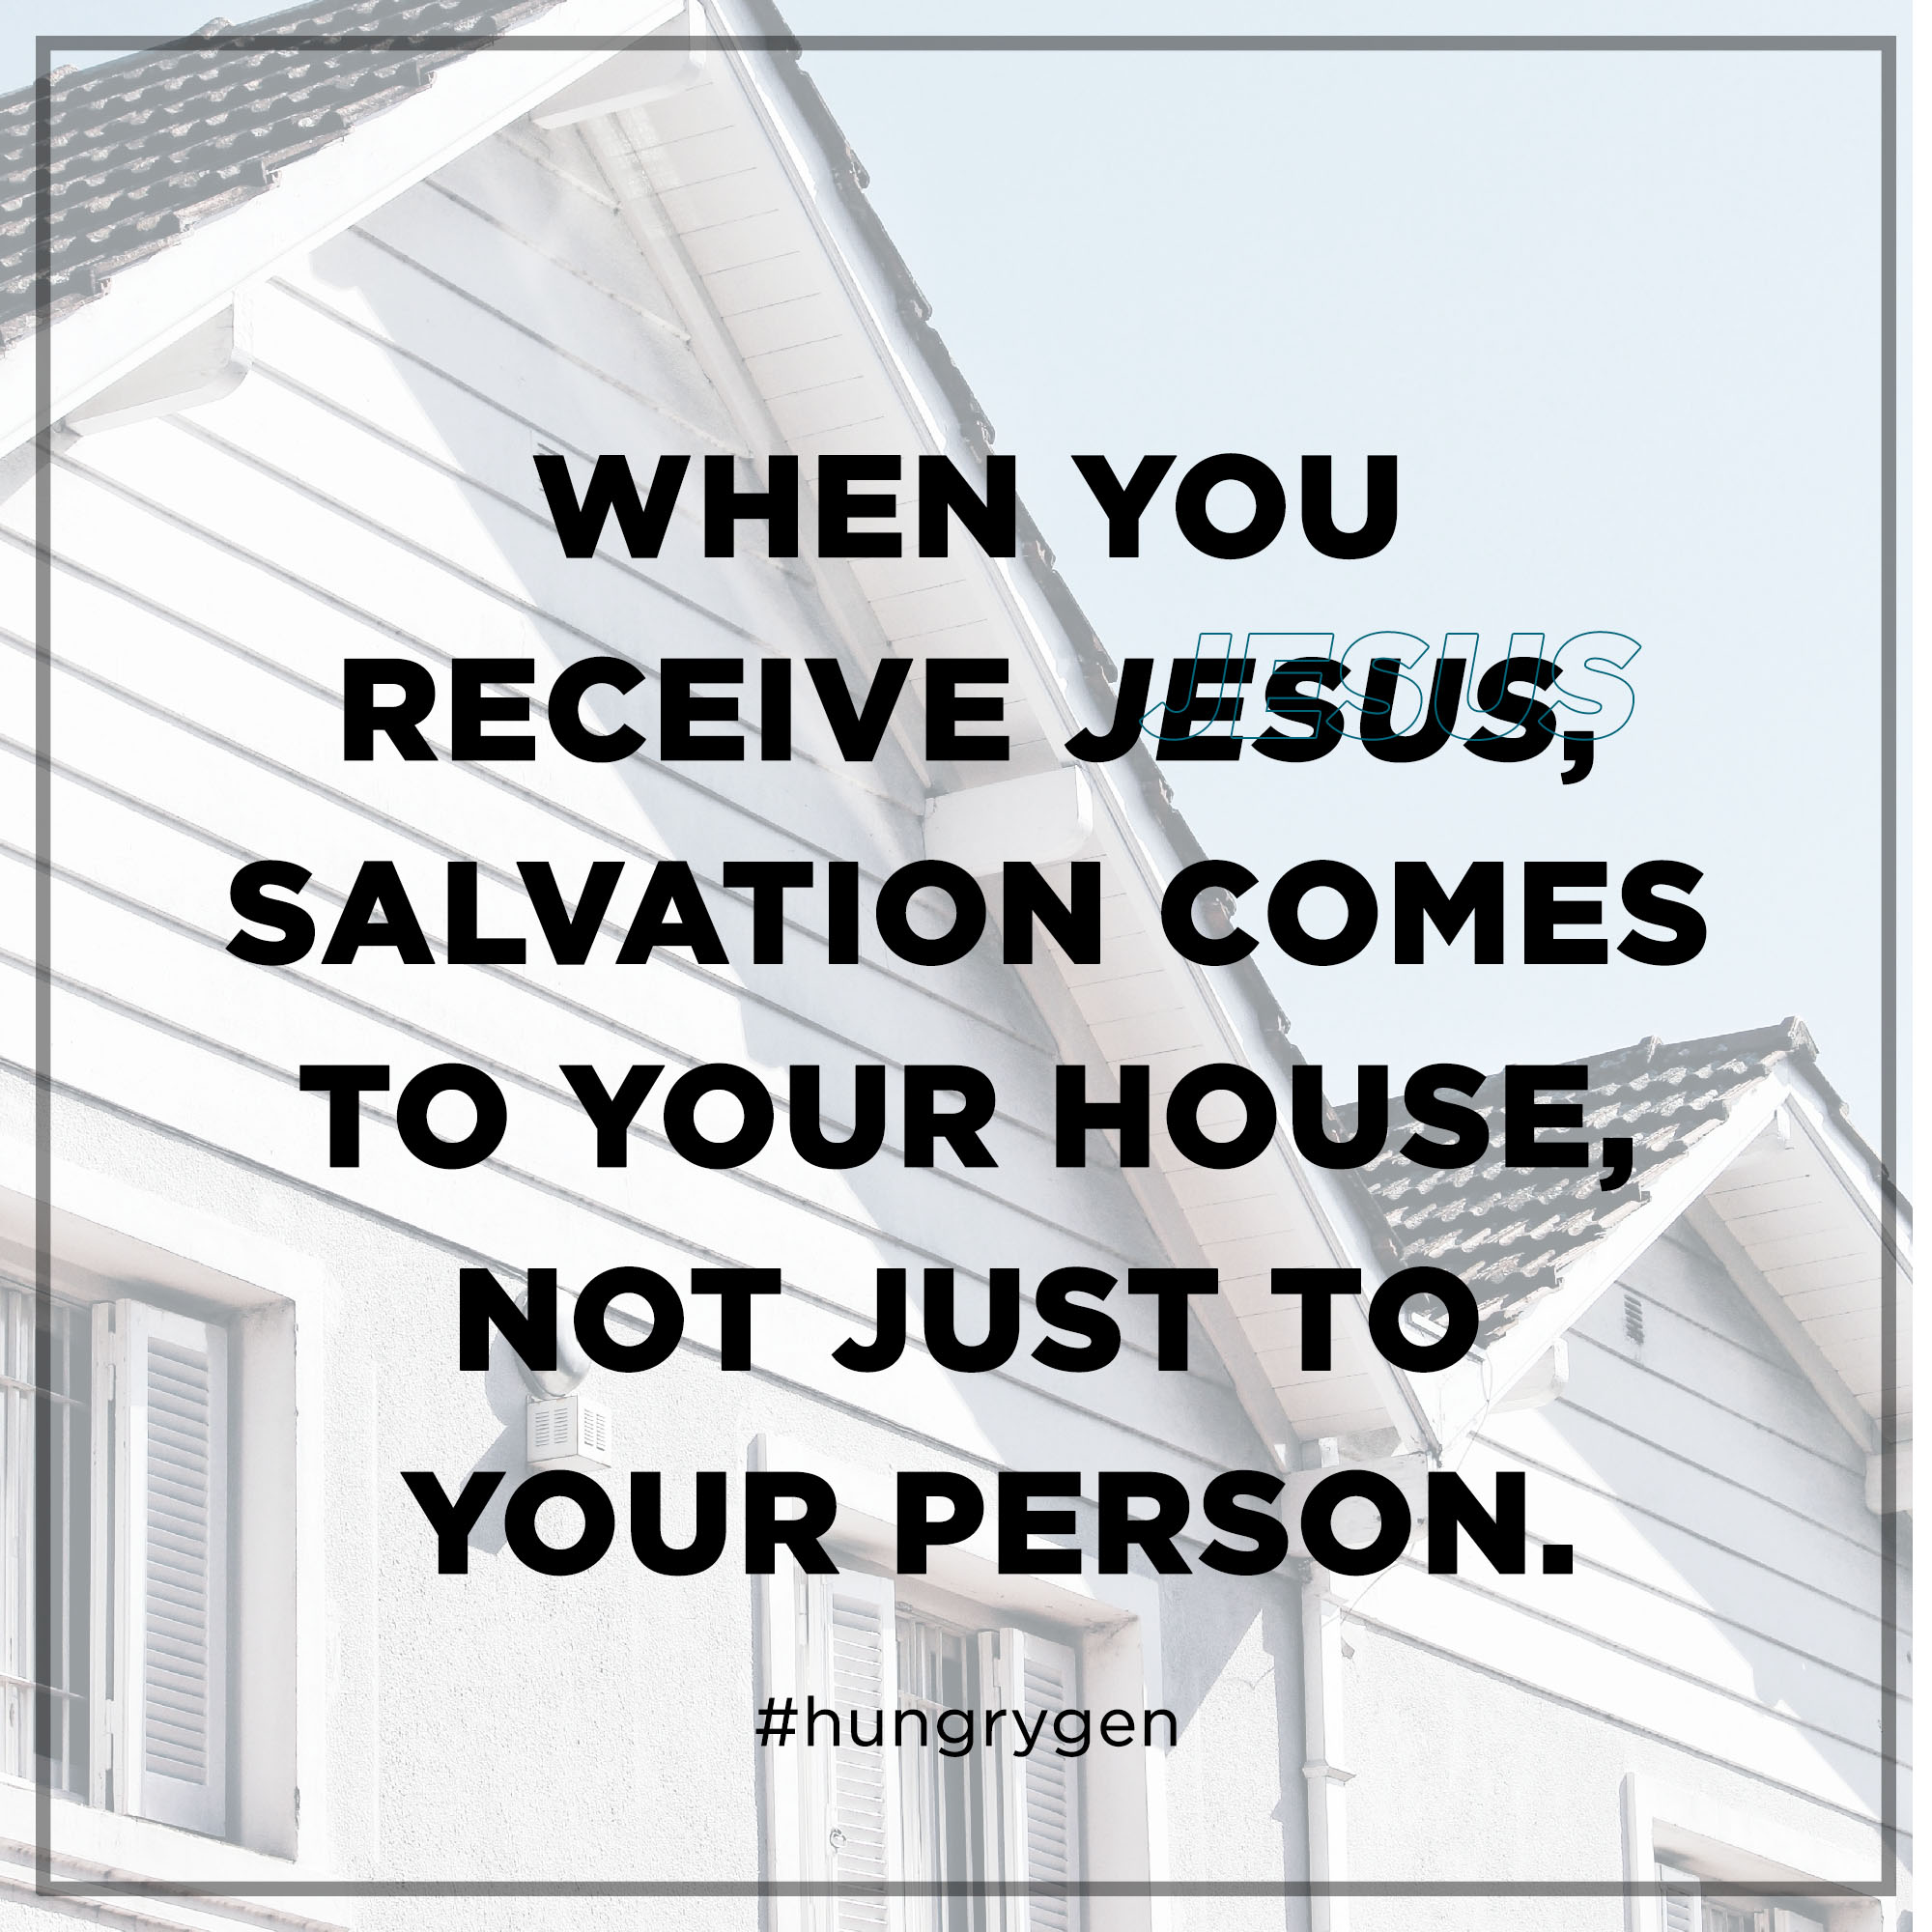 Shareable Quote for “Take Jesus Home”